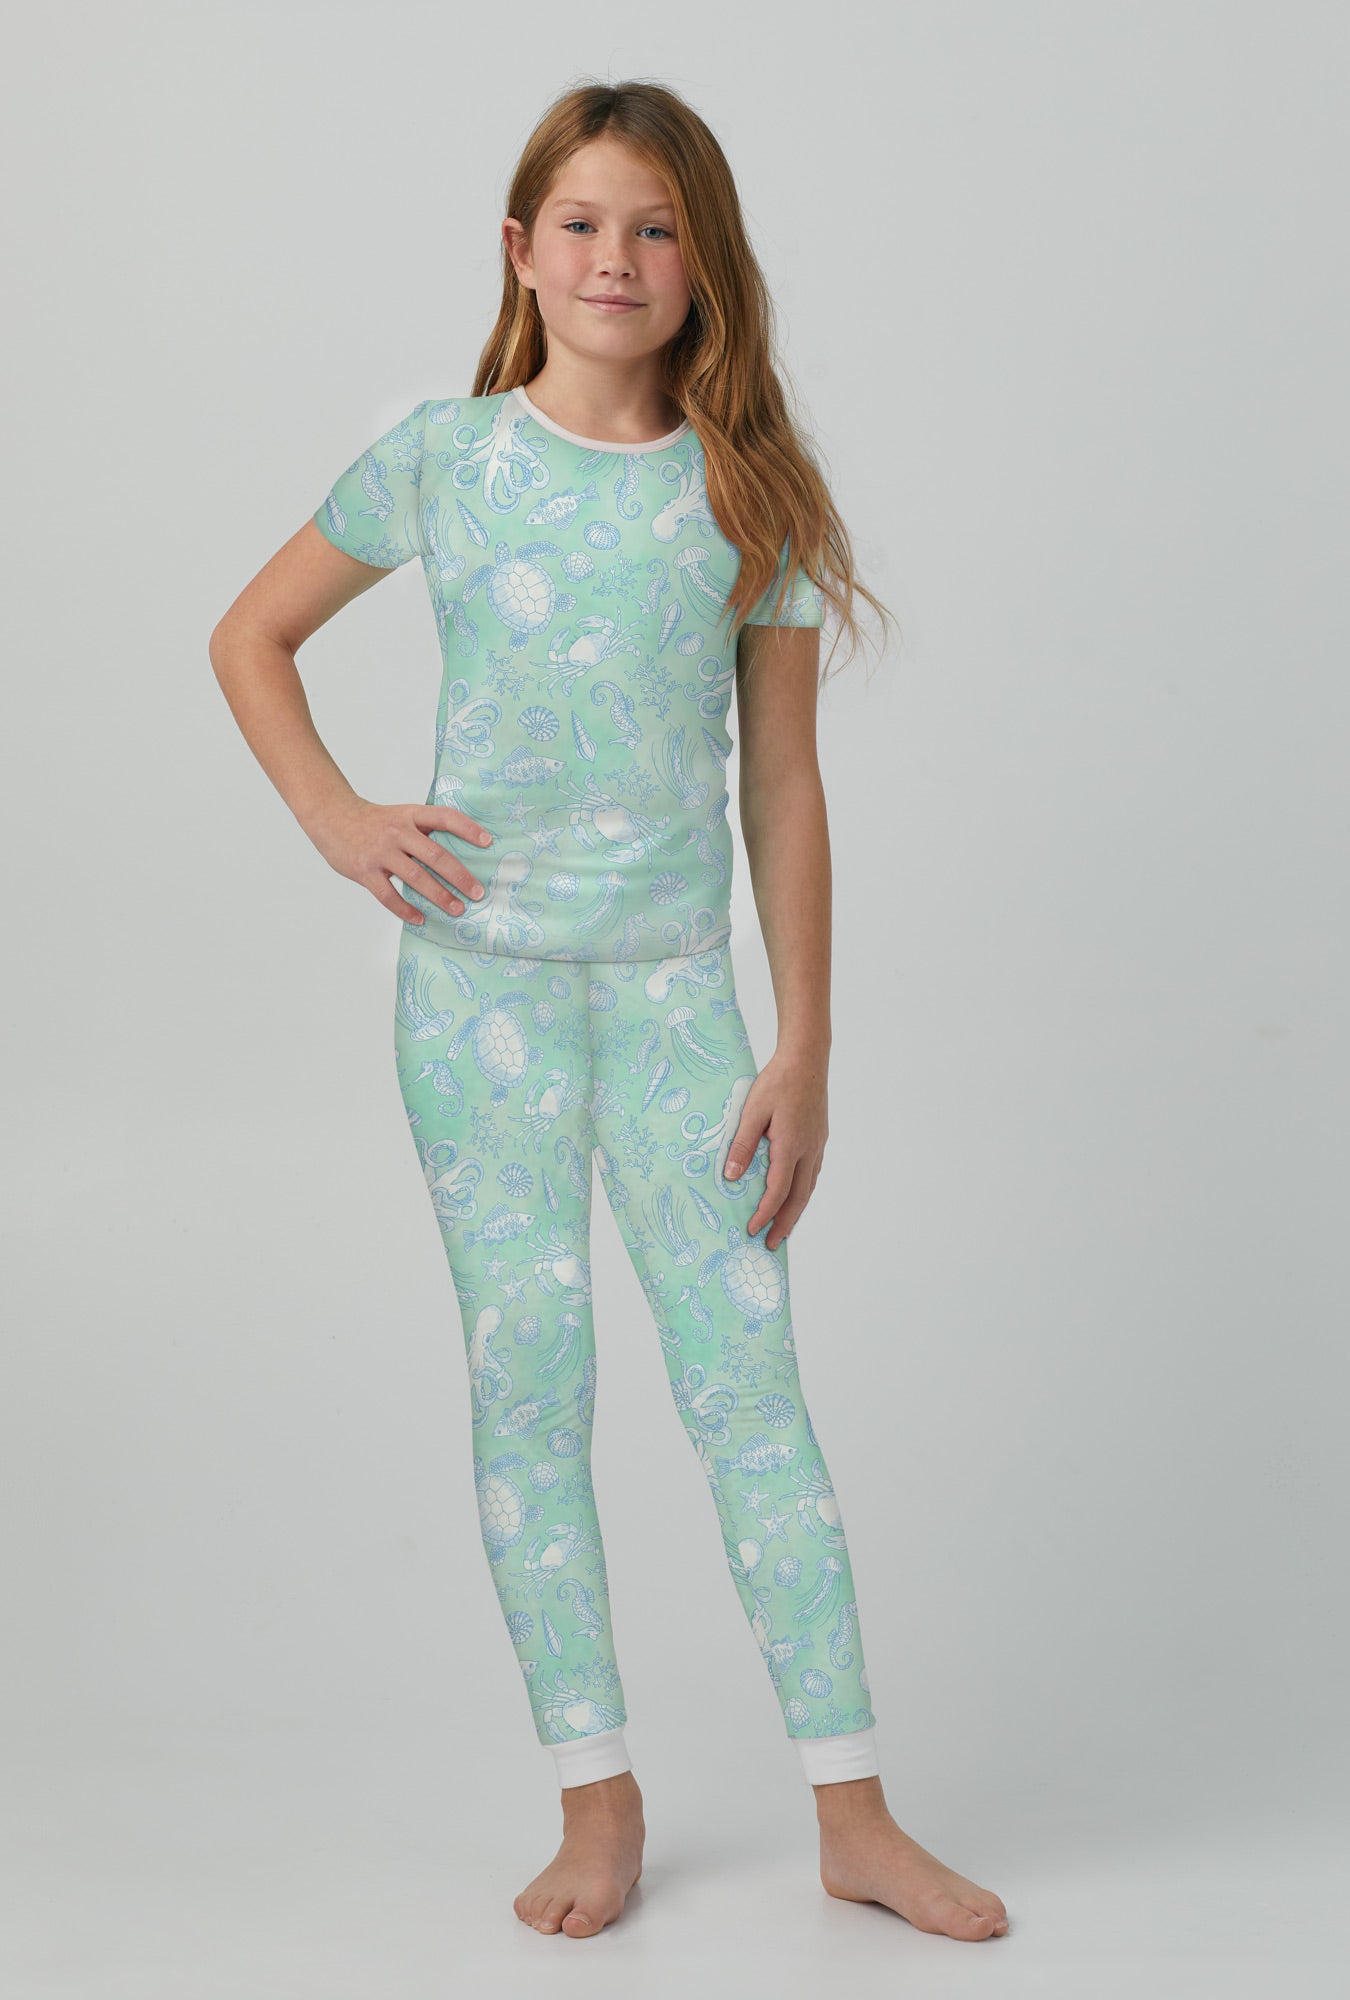 A girl wearing short sleeve stretch jersey pj set with aquatic life print